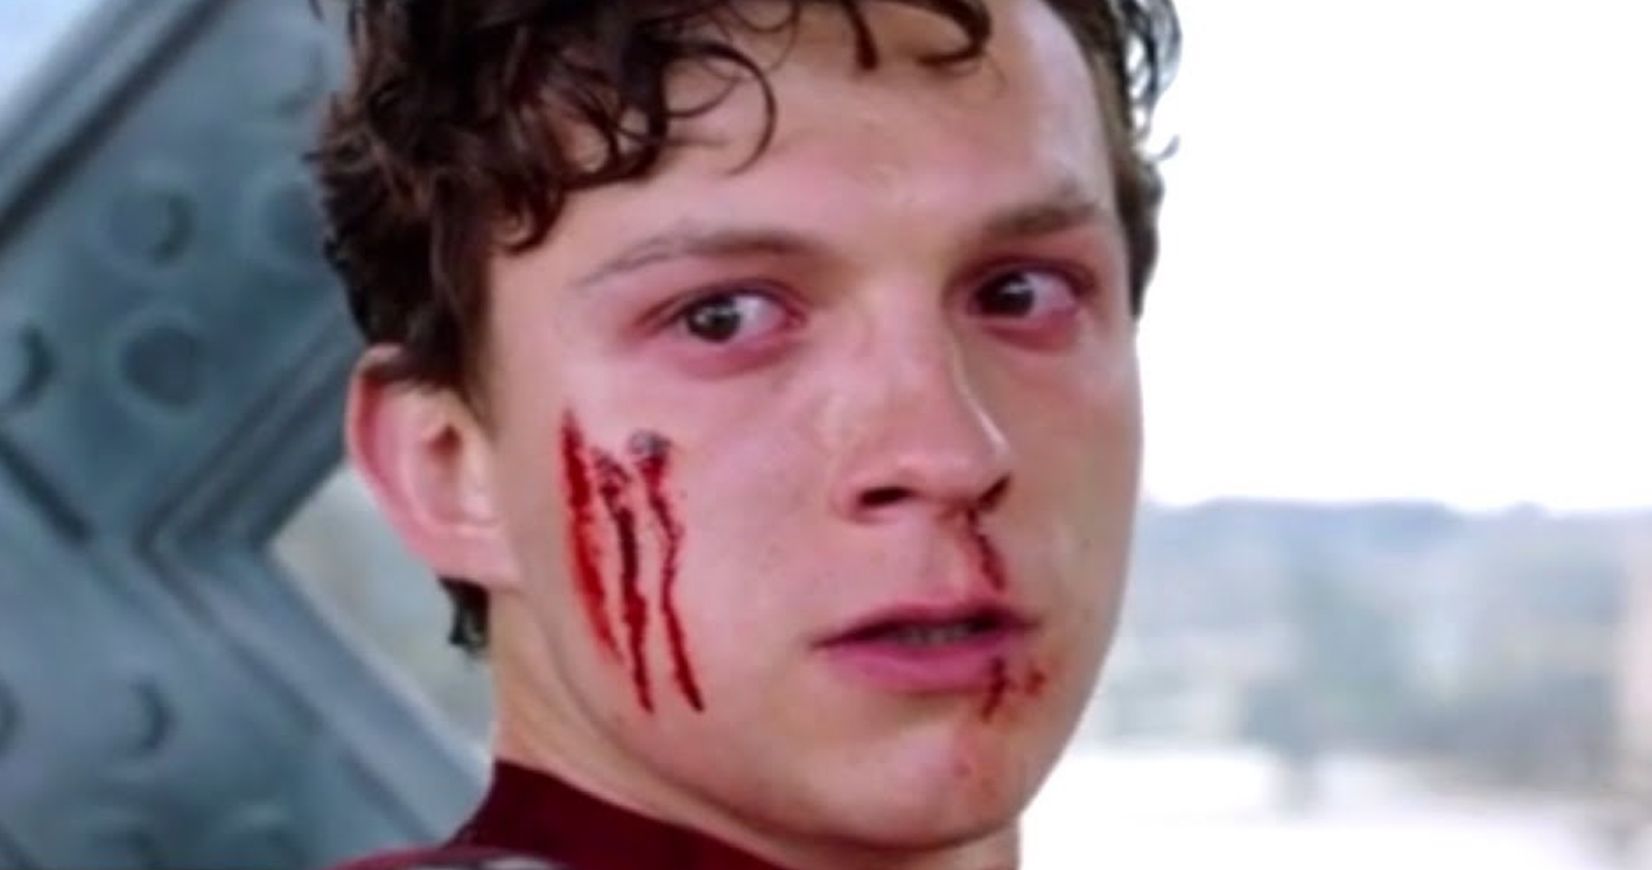 Spider-Man: No Way Home Cast Photo Reveals a Bruised and Beaten Peter Parker